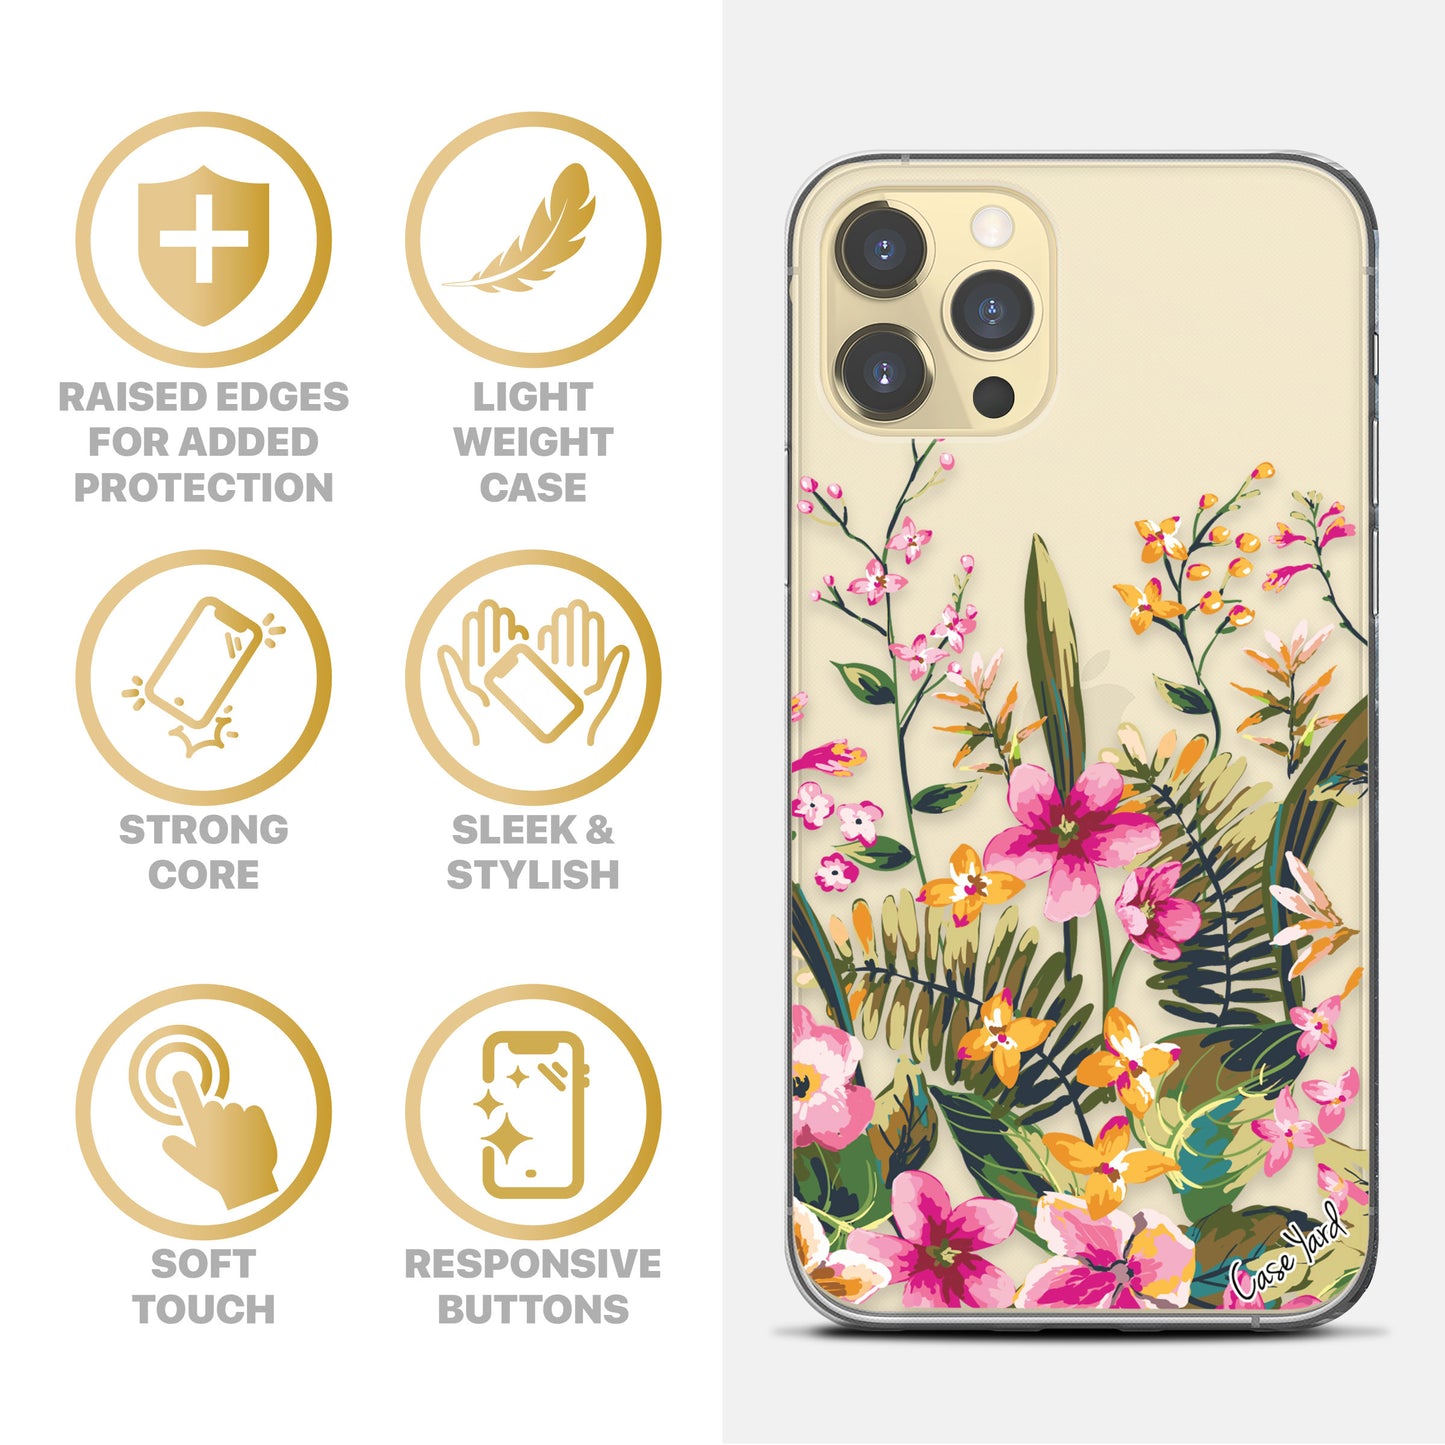 TPU Case Clear case with (Blossom Flower) Design for iPhone & Samsung Phones